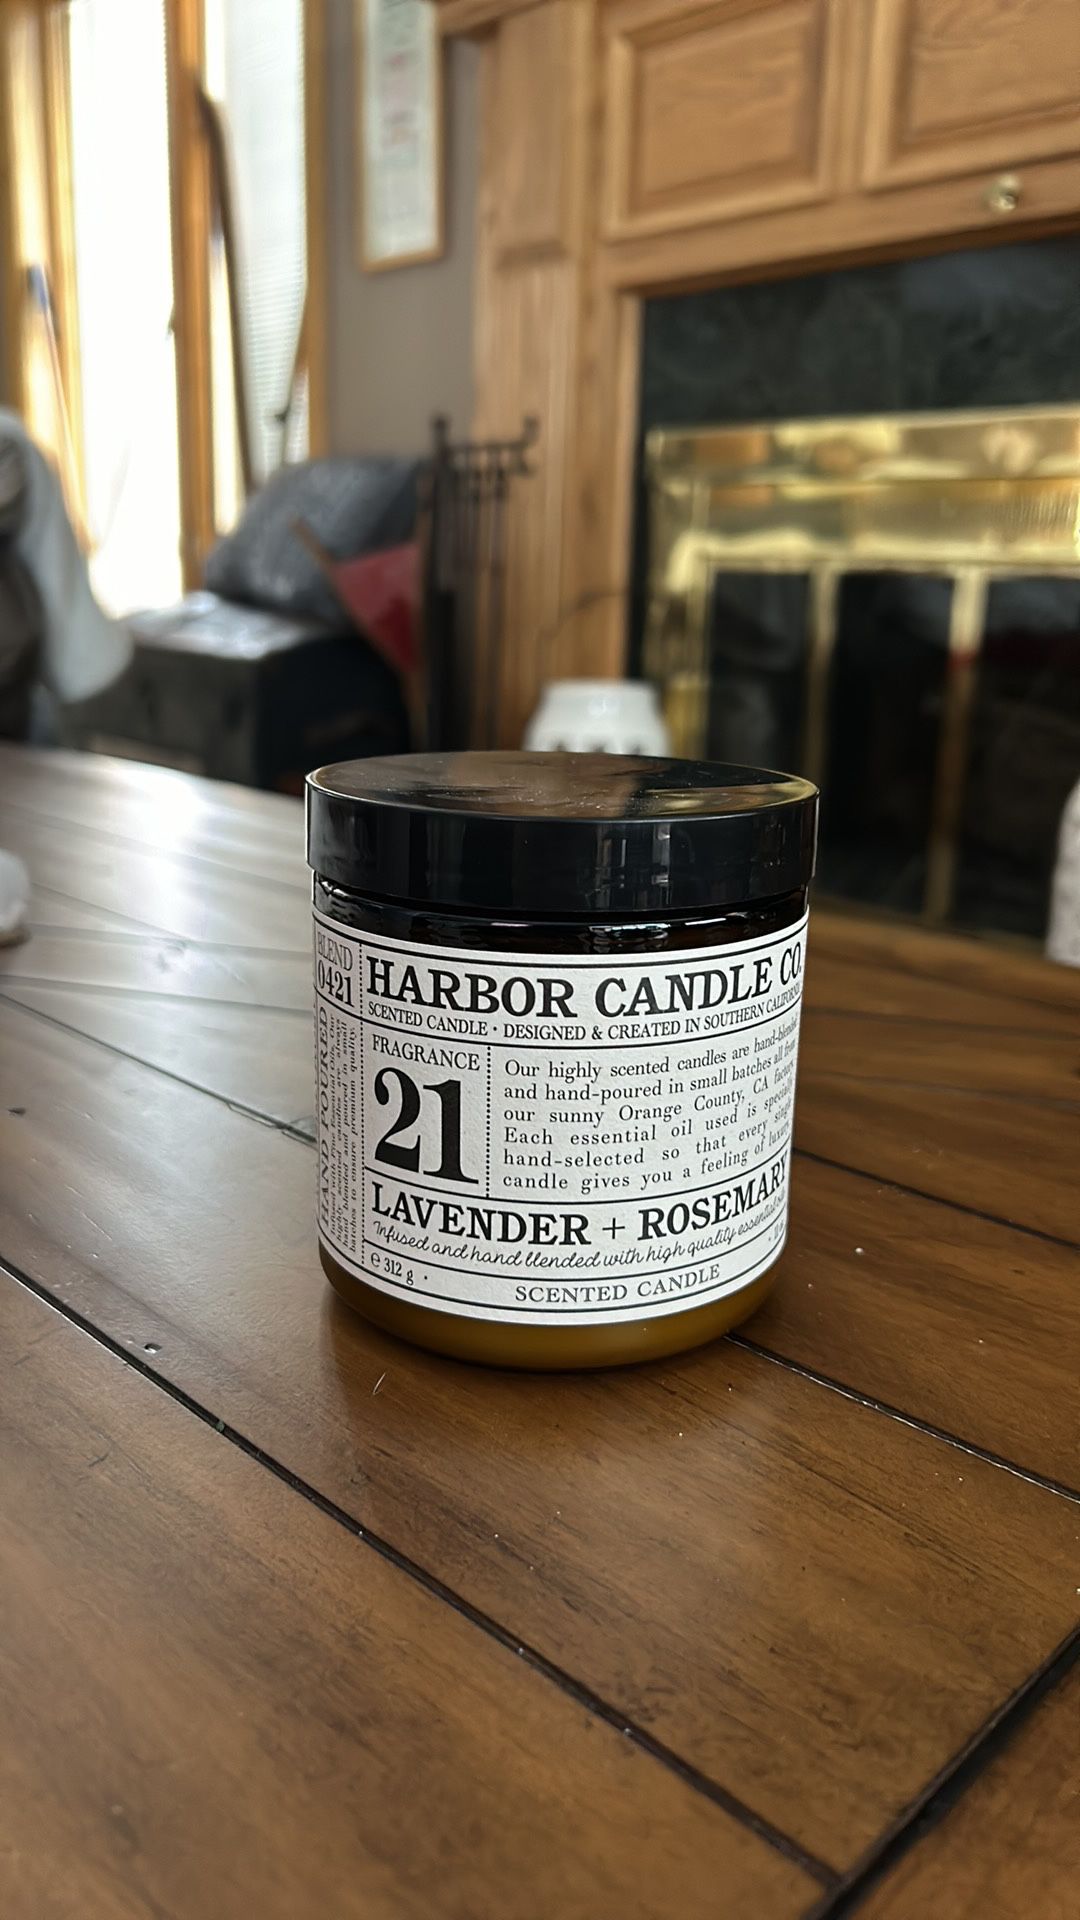 Harbour Candle Co Lavender and Rosemary Scented Candle